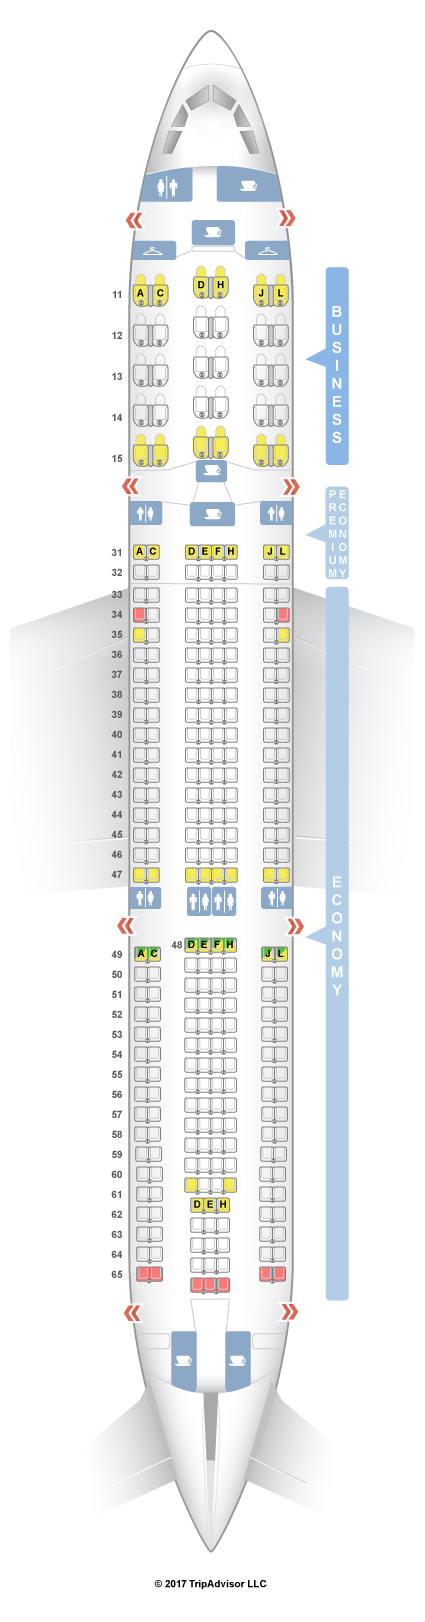 Delta Airlines Airbus A333 Seating Chart